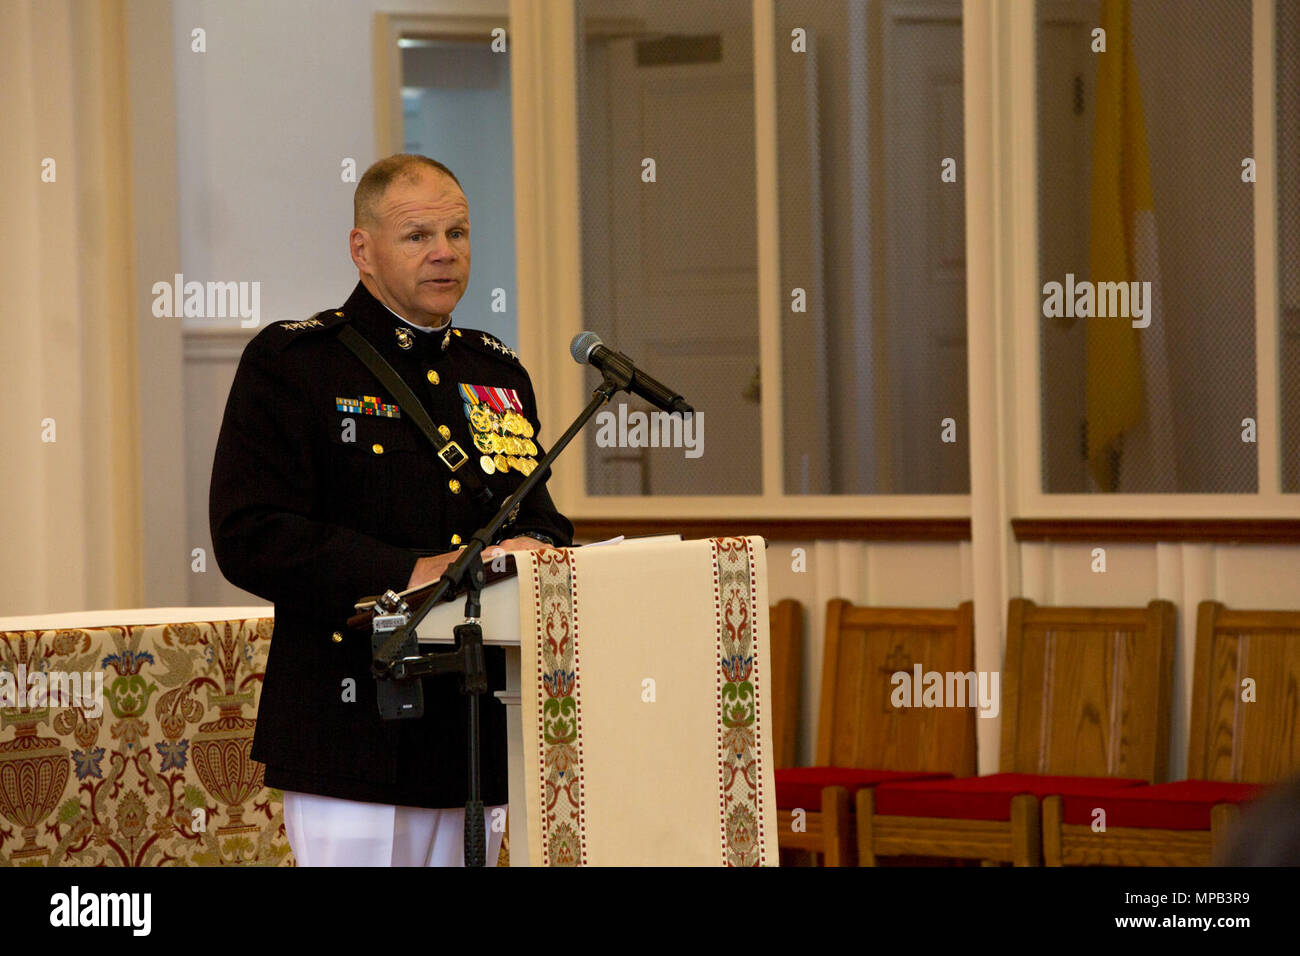 Commandant of the Marine Corps Gen. Robert B. Neller gives remarks during the memorial service of retired U.S. Marine Corps Lt. Gen. Lawrence F. Snowden at the U.S. Marine Memorial Chapel, Quantico, Va., April 8, 2017. Snowden retired in 1979 after nearly 40 years of service, fought in engagements during World War II, the Korean War, and Vietnam. He passed away Feb. 18, 2017. He was prominently known after retirement for organizing joint 'Reunion of Honor' missions which is an opportunity for Japanese and U.S. veterans and their families, dignitaries, leaders and service members from both nati Stock Photo